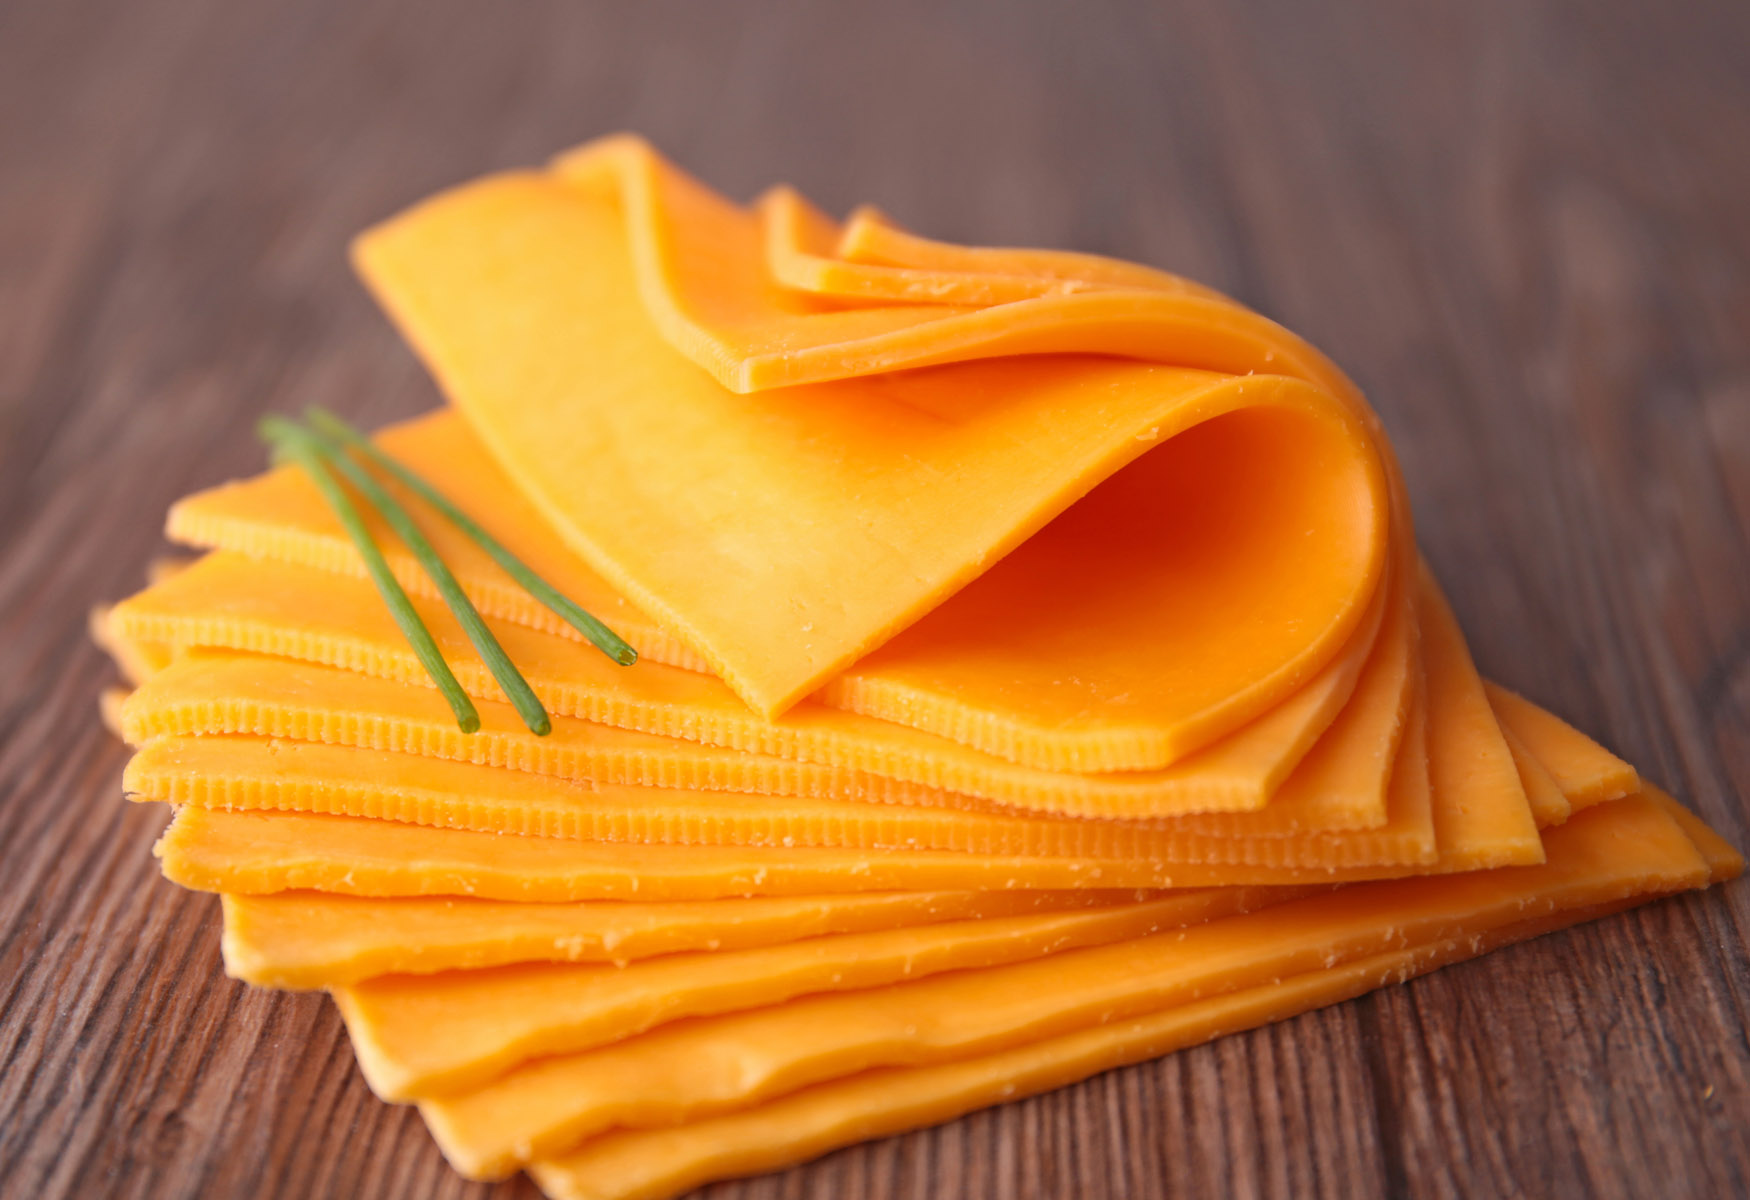 15-cheddar-cheese-slice-nutrition-facts